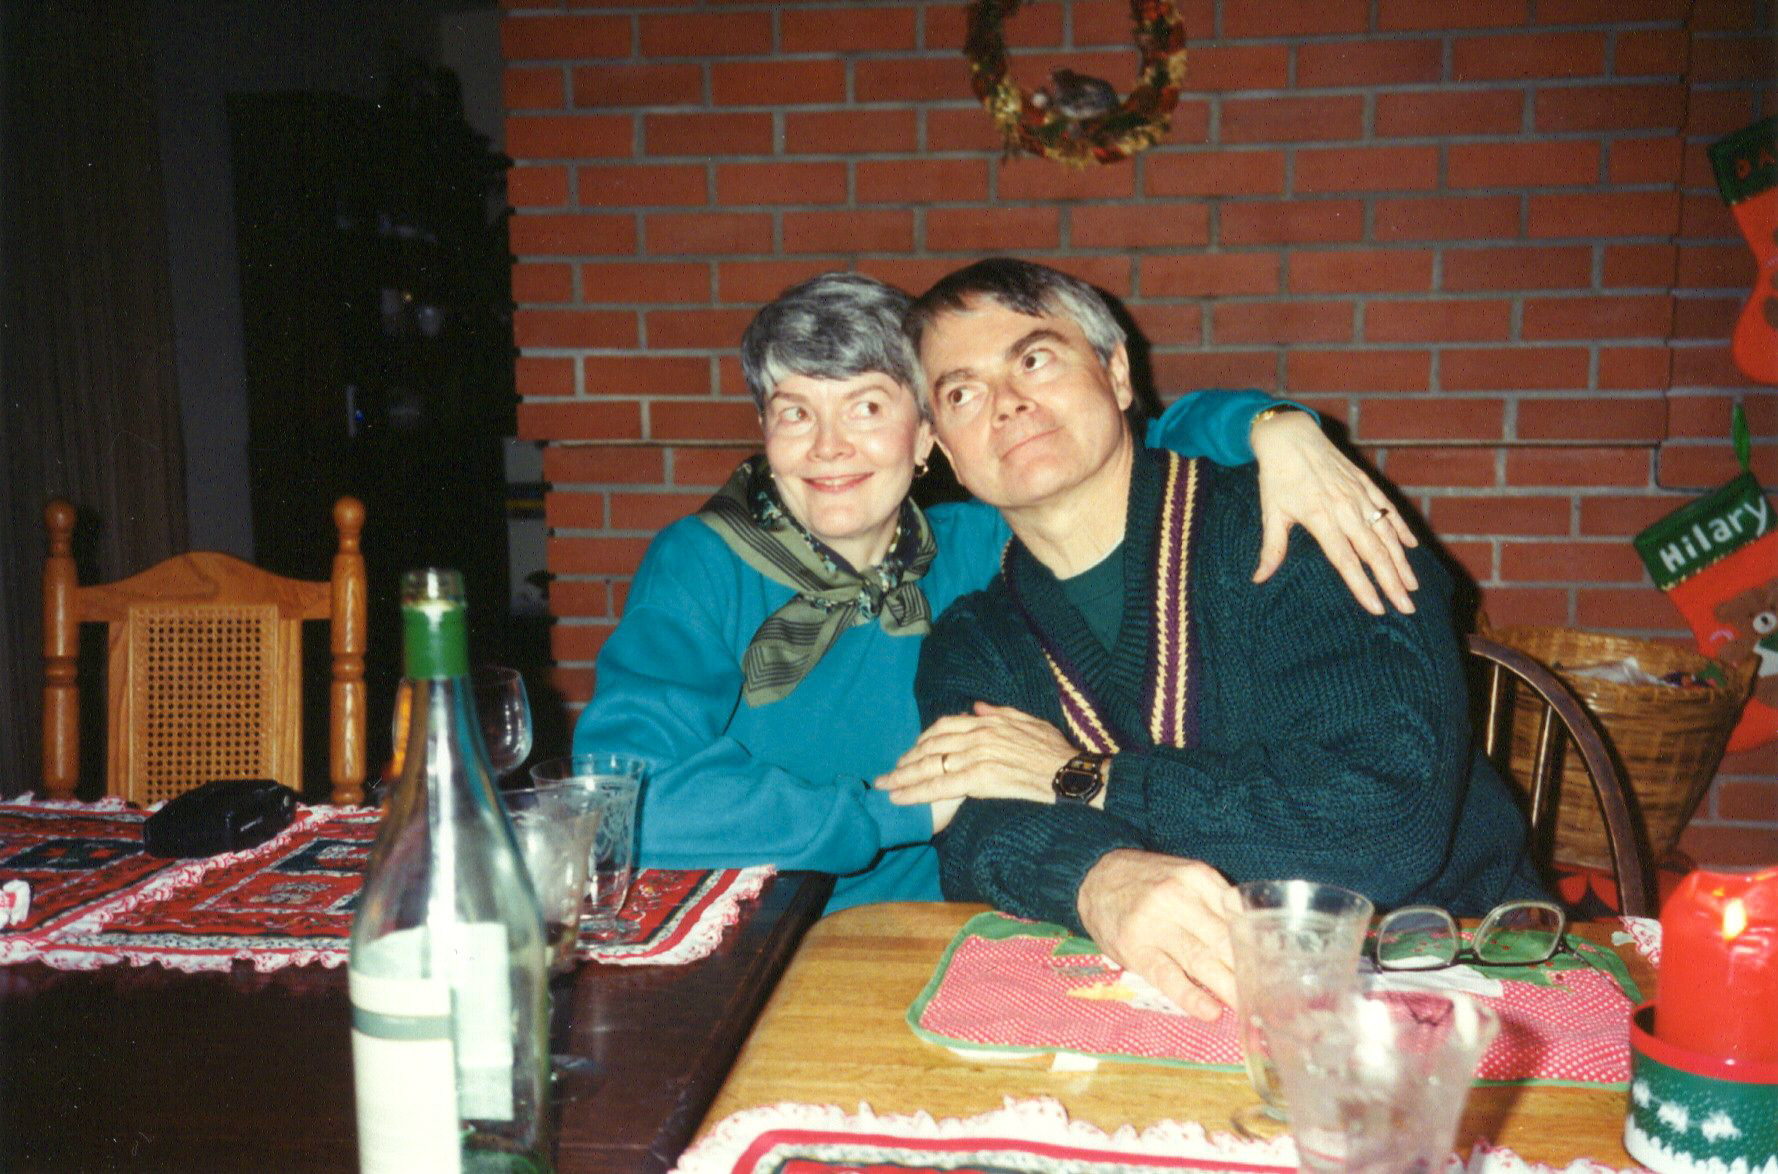 Frances and her brother in 1993